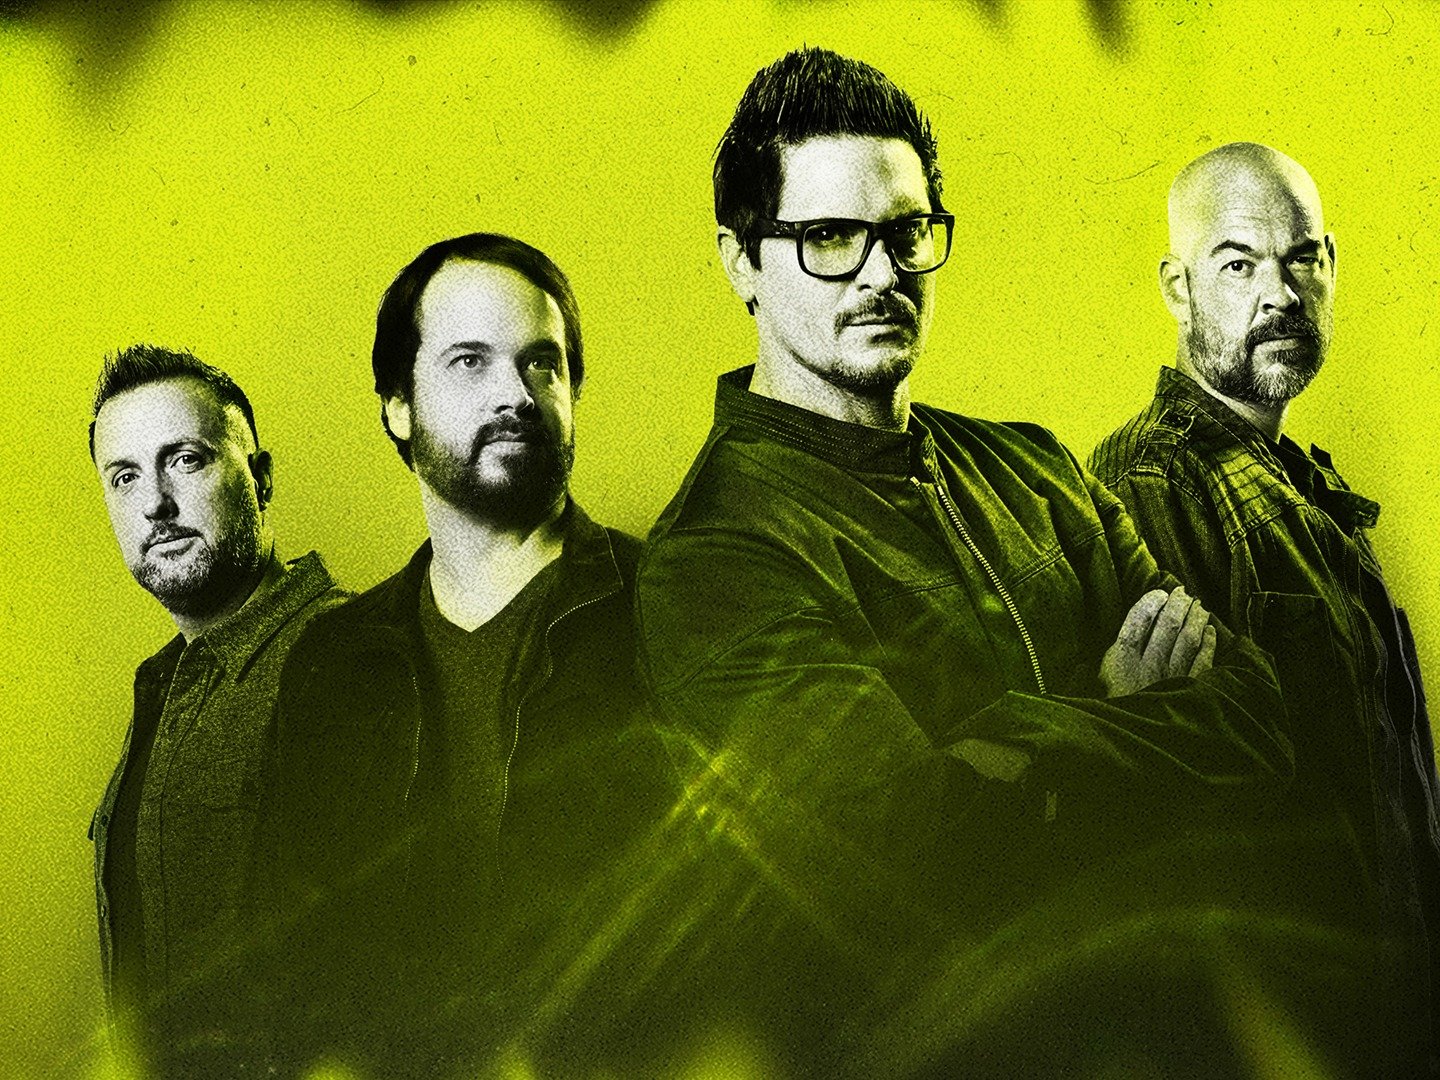 Ghost Adventures on TV Season 18 Episode 3 Channels and schedules